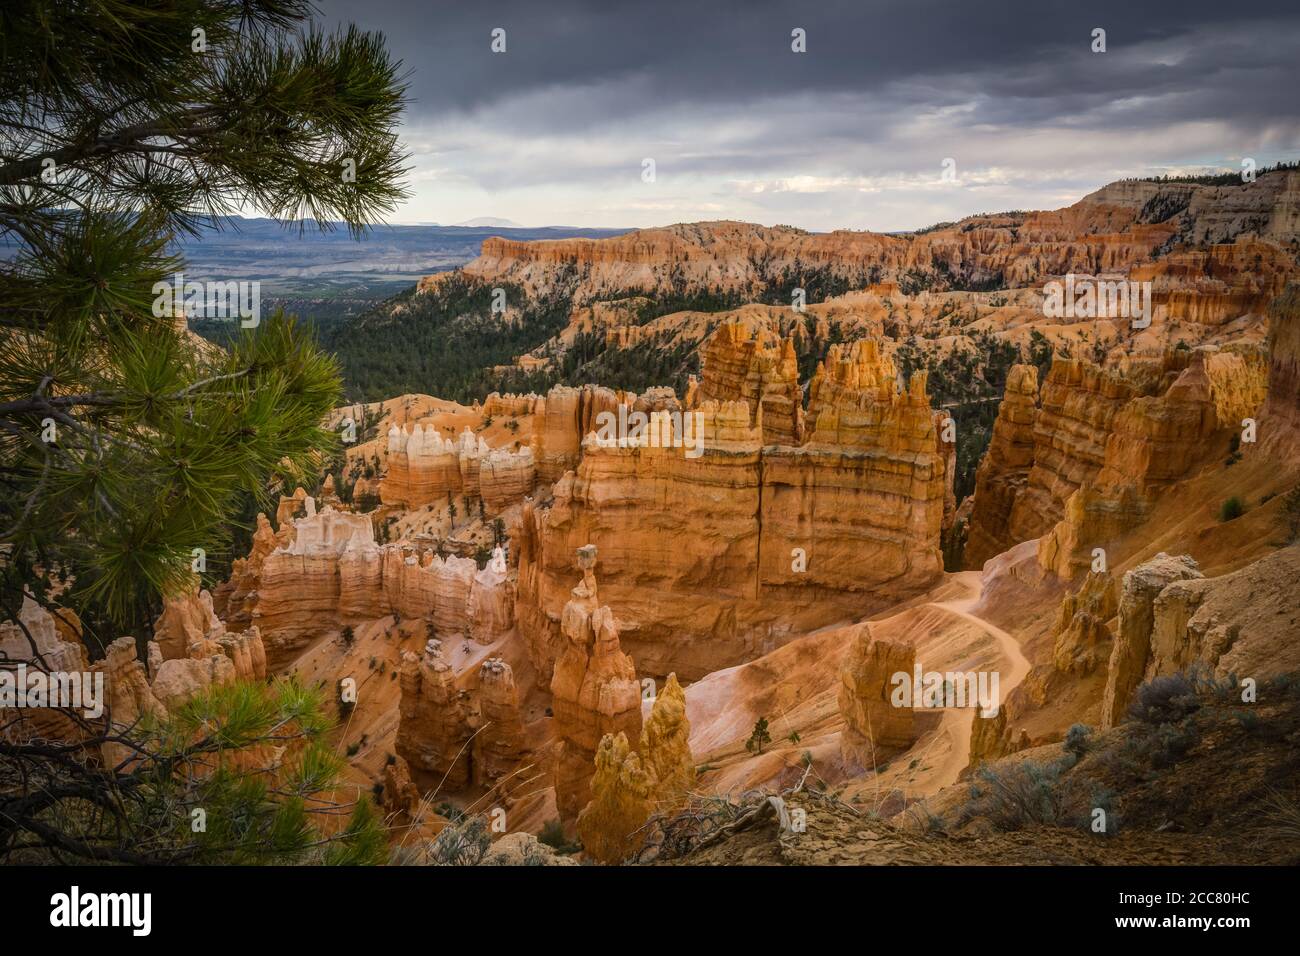 Utah USA National Parks and Landscapes Stock Photo